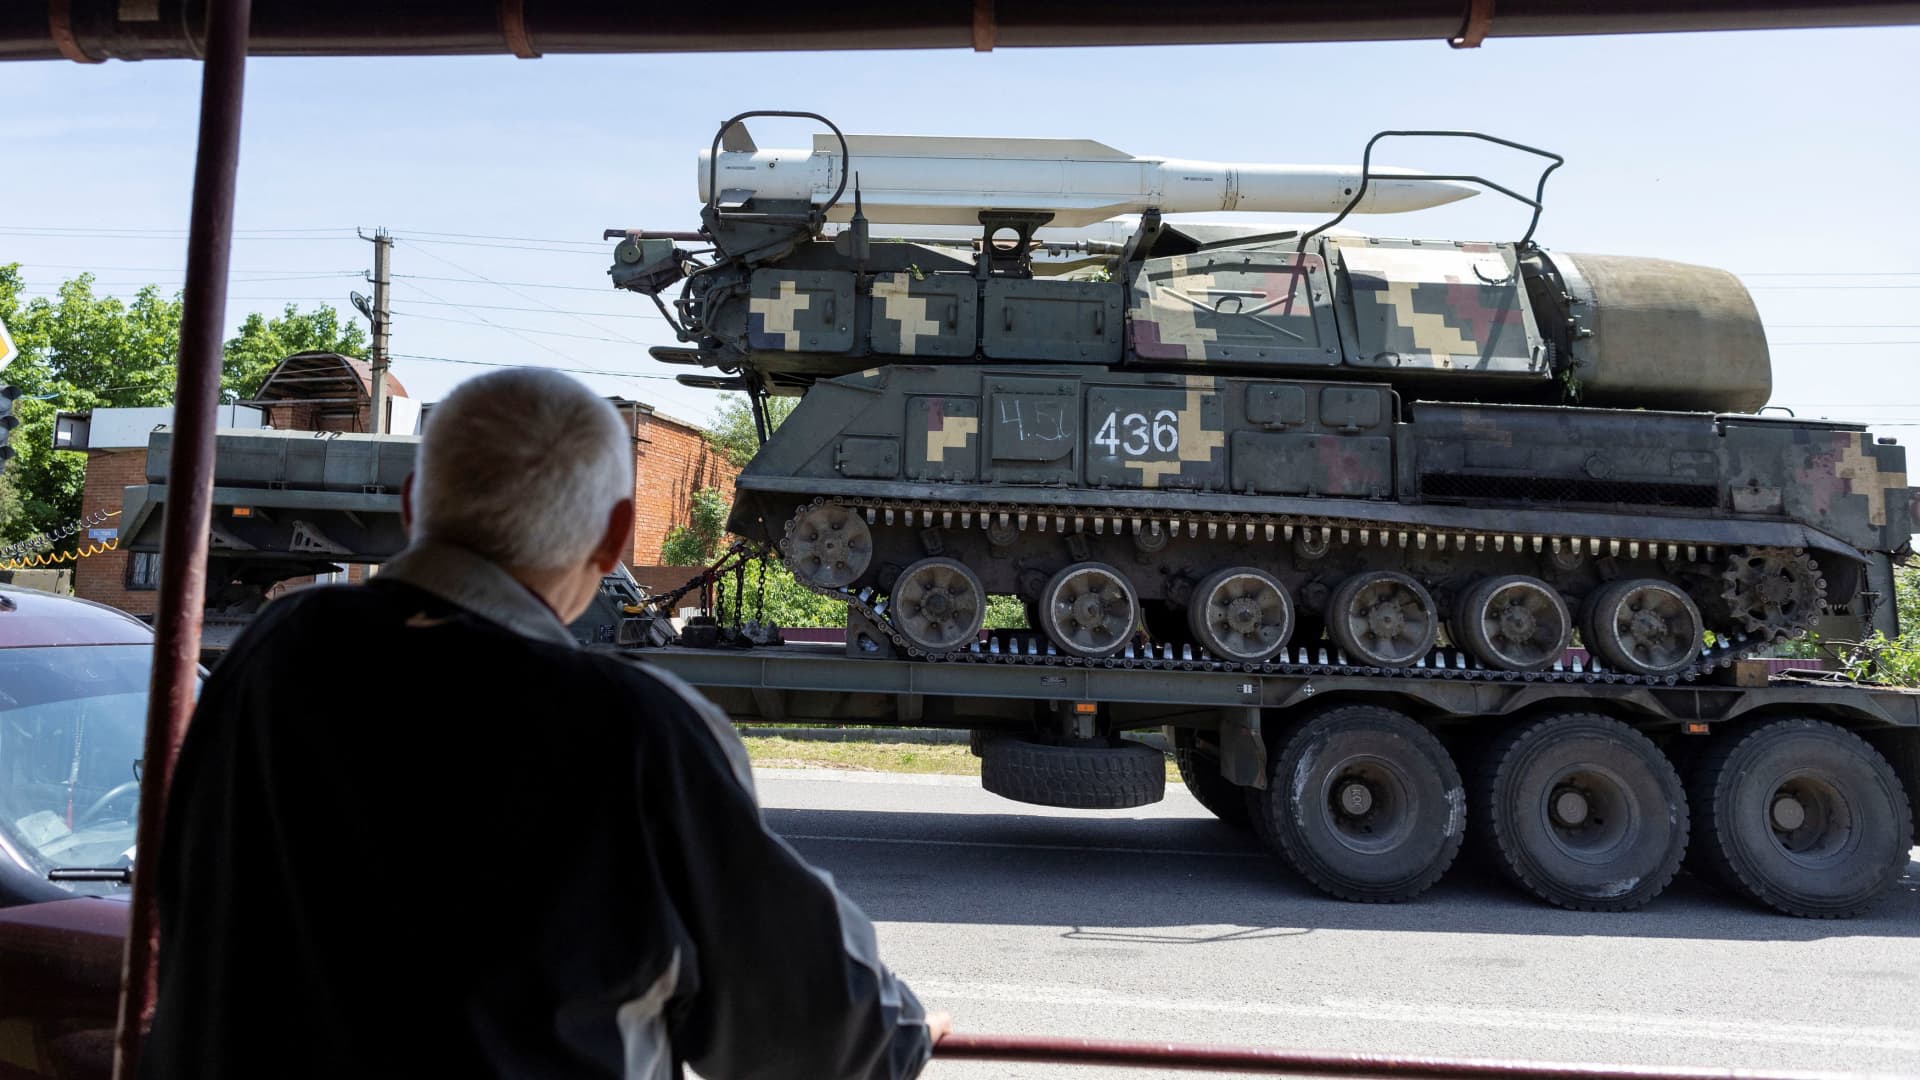 A local resident looks at a rocket launcher vehicle being transported, amid Russia's invasion of Ukraine, near Kramatorsk, Donetsk region, Ukraine, May 30, 2022 